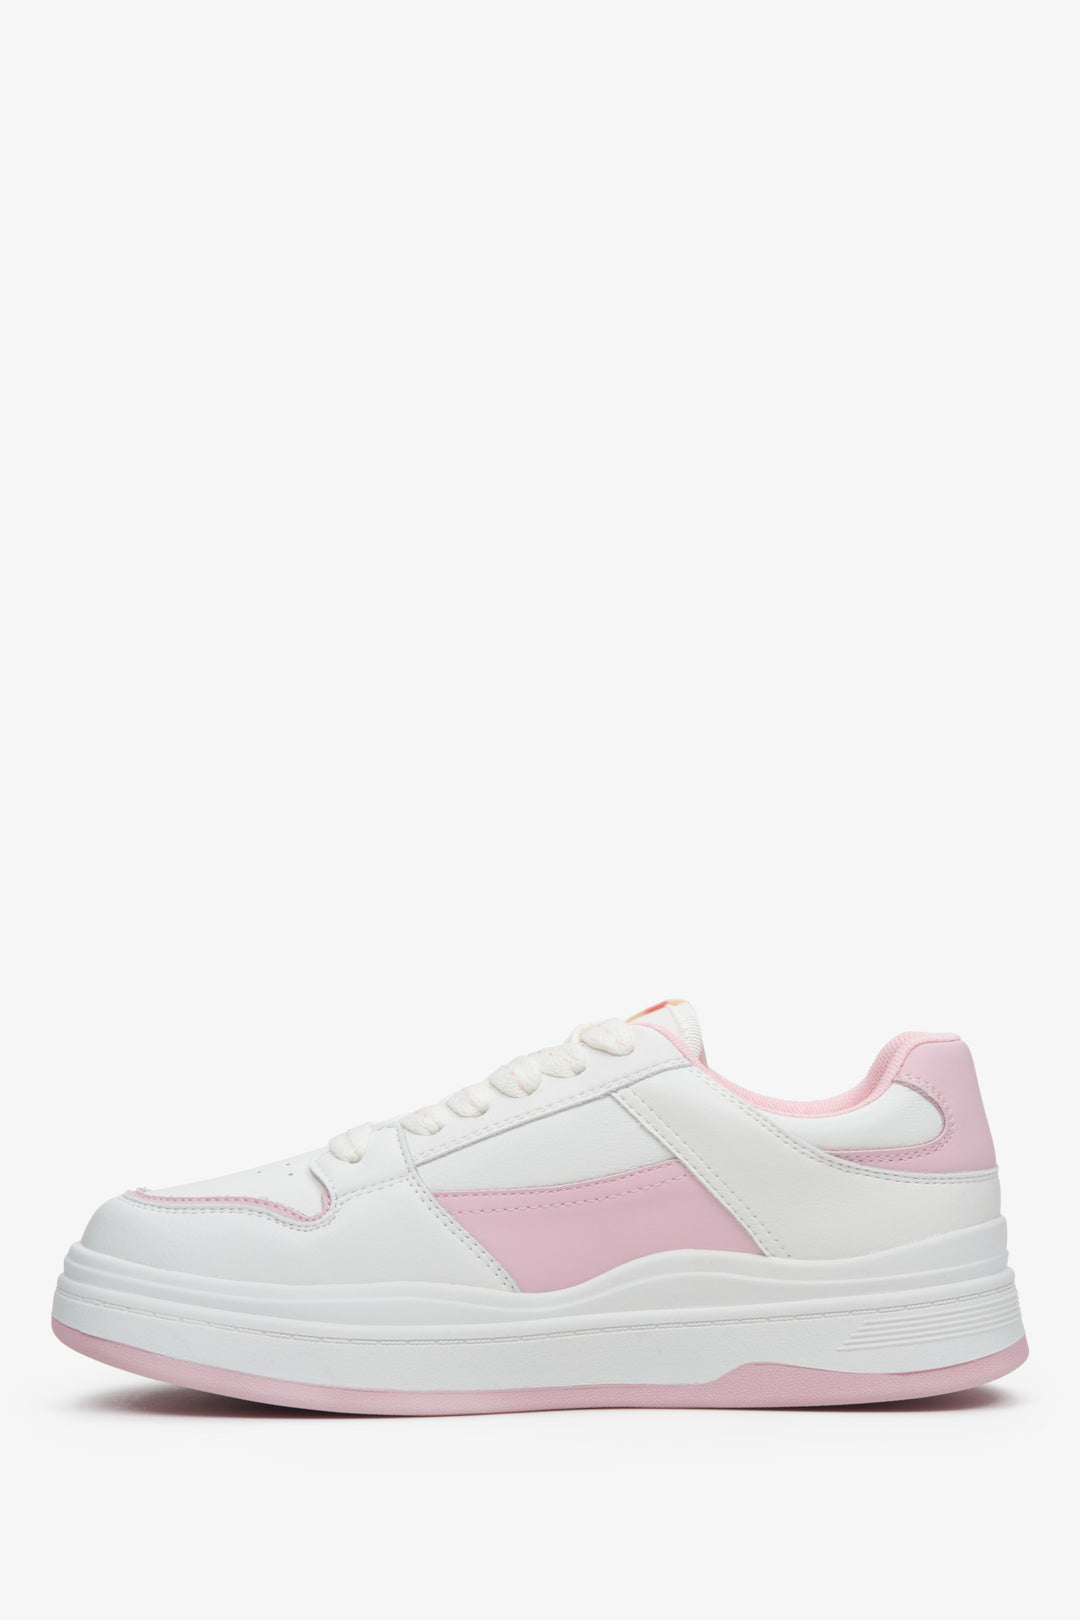 Women's white and pink leather sneakers ES 8 - presentation of a shoe toe and sideline.